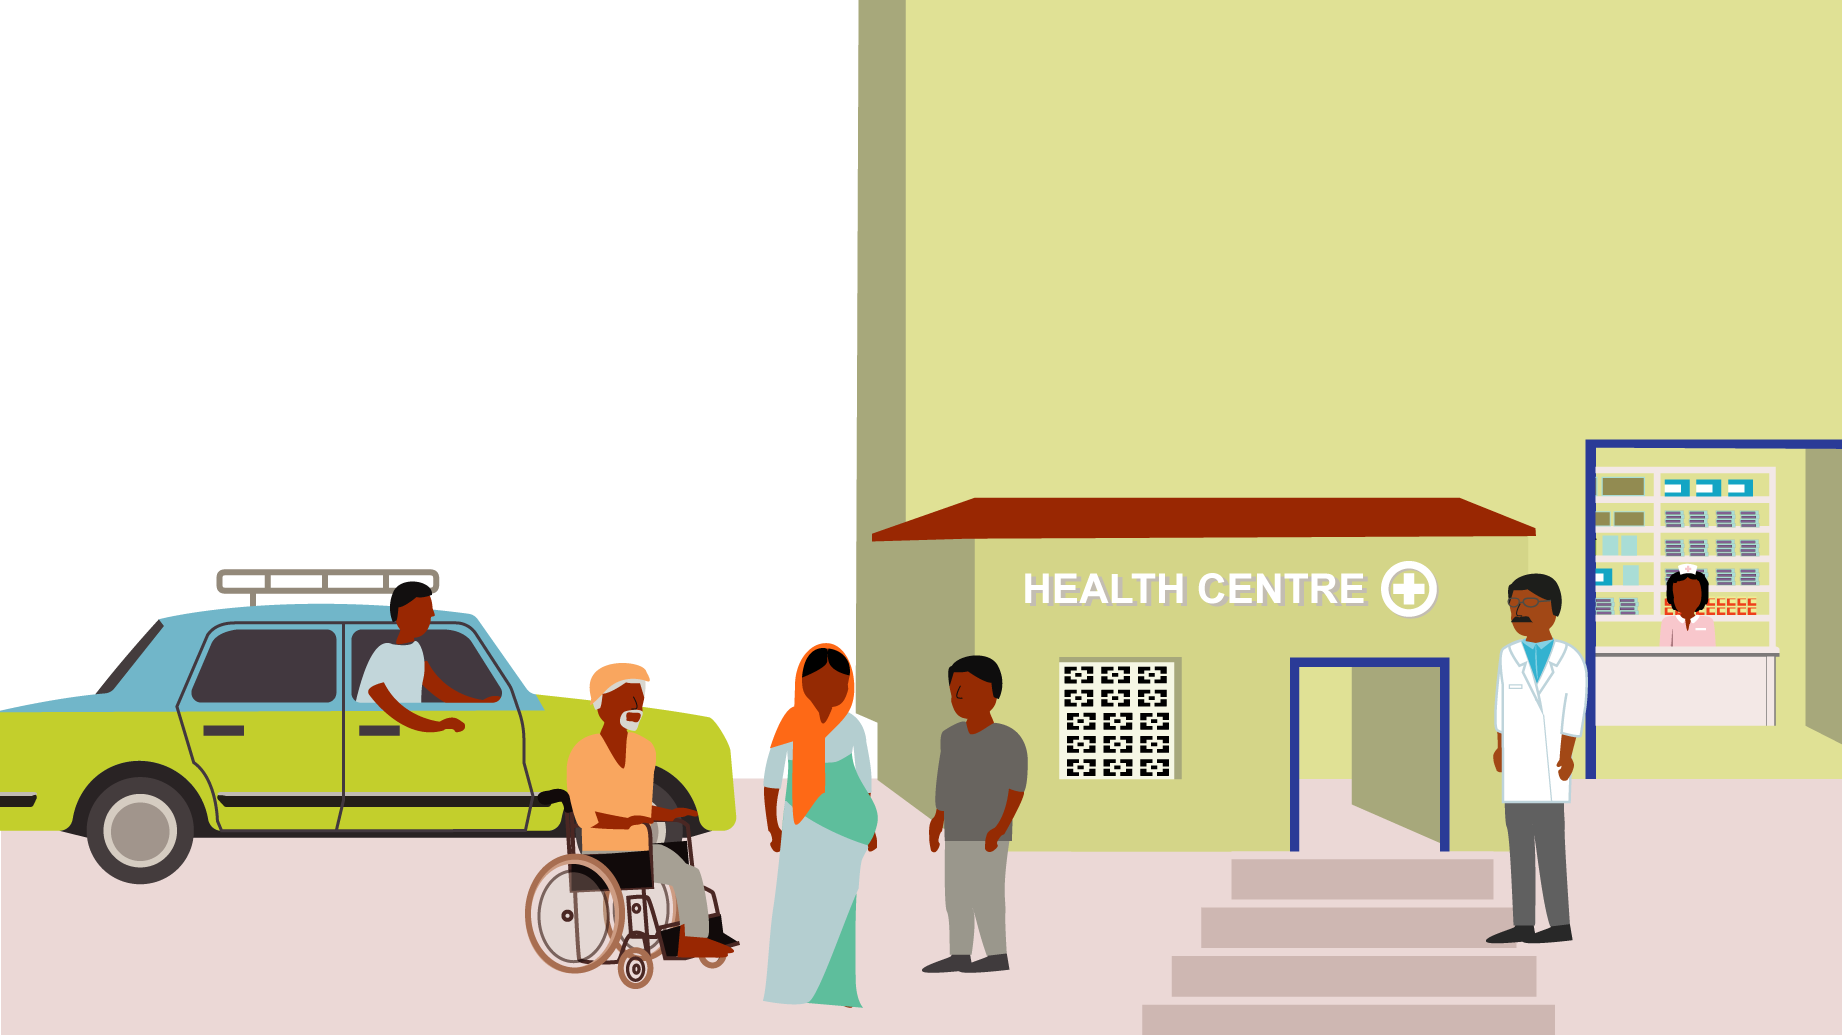 QUEST FOR AN INCLUSIVE HEALTH CENTRE